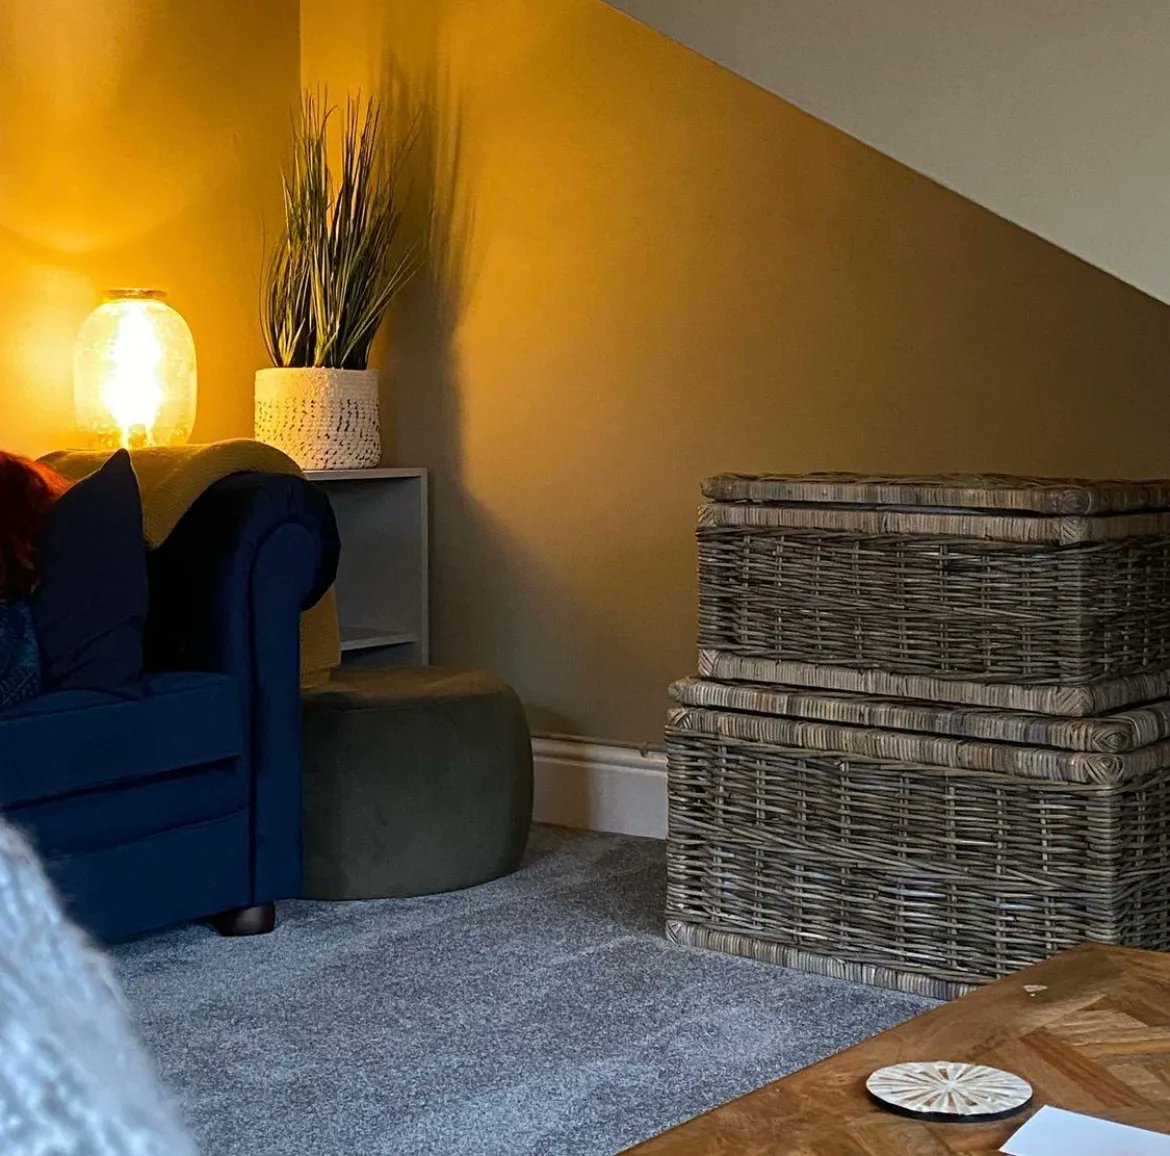 Looking for self catering accommodation? Why not book one of our gorgeous holiday homes? 

Call us direct for the best deal on 01287 622544! 

#holidayhomes #accommodation #thespahotelsaltburn #thespabythesea #staycation #holidayrentals #airbnb #holidayhomessaltburn #dogfriendly